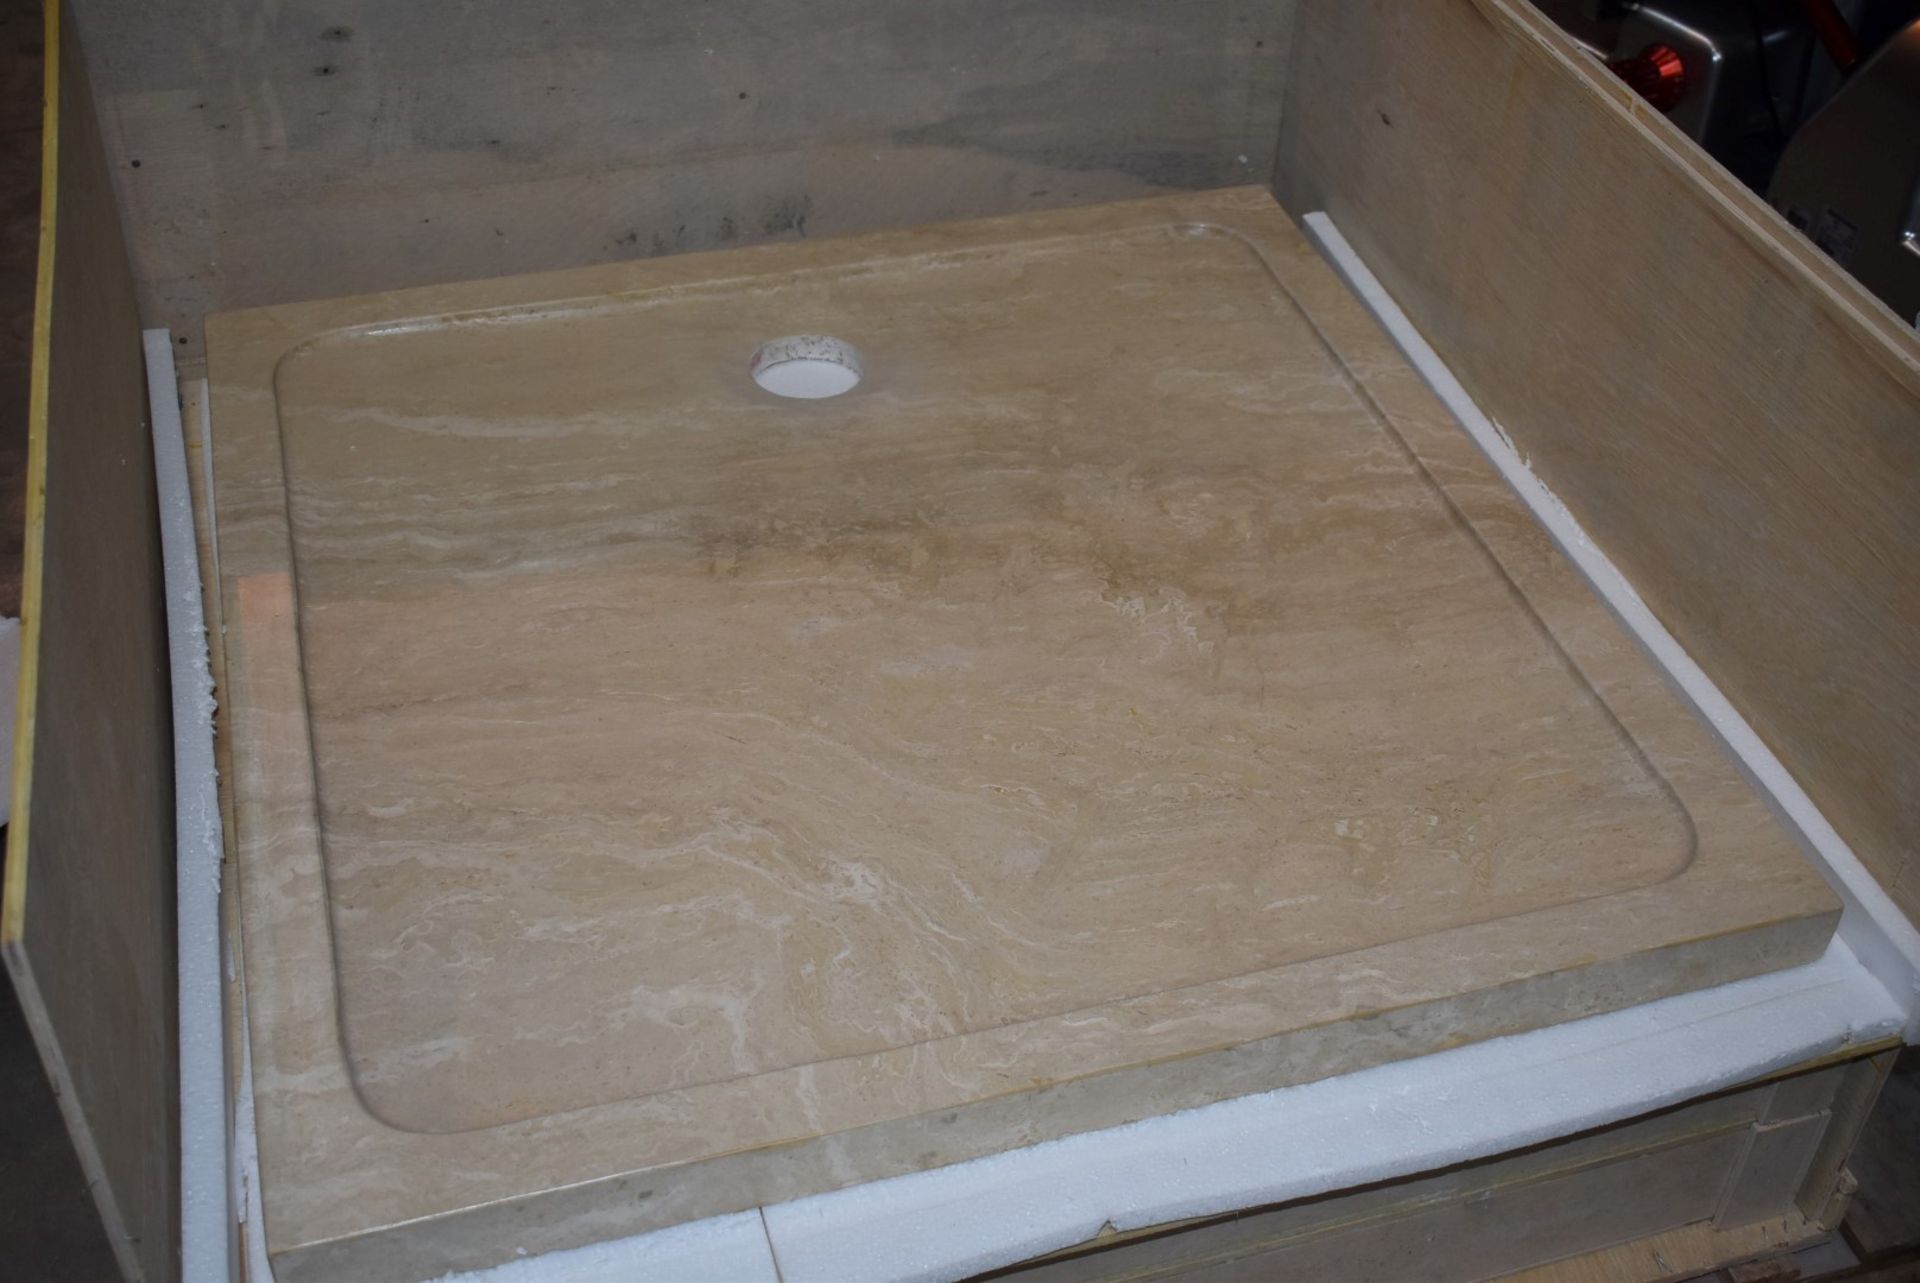 1 x Stonearth Luxury Solid Travertine Stone 900mm Shower Tray - Hand Made From Travertine Stone - Image 4 of 12